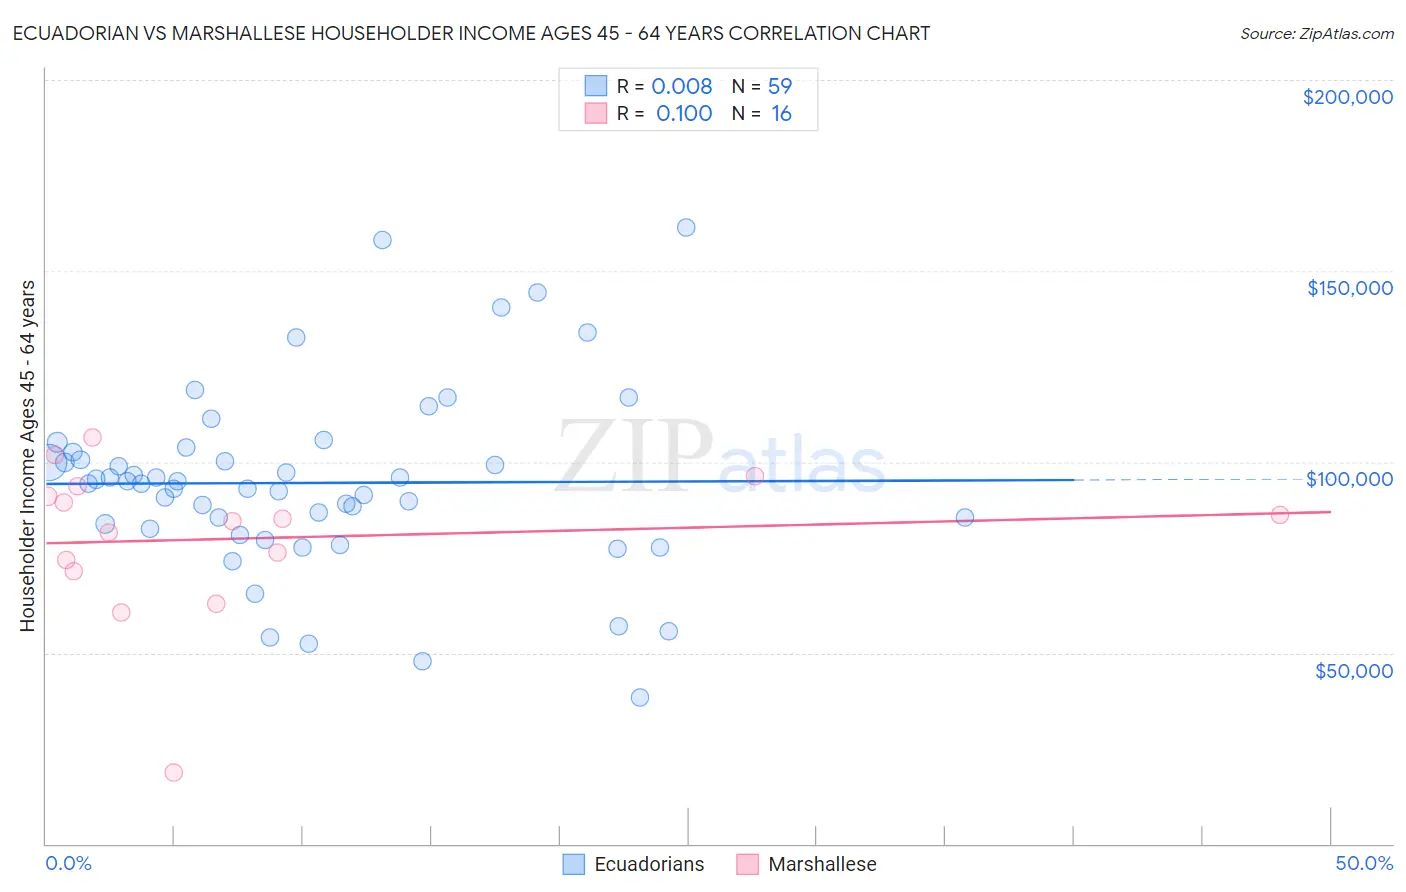 Ecuadorian vs Marshallese Householder Income Ages 45 - 64 years